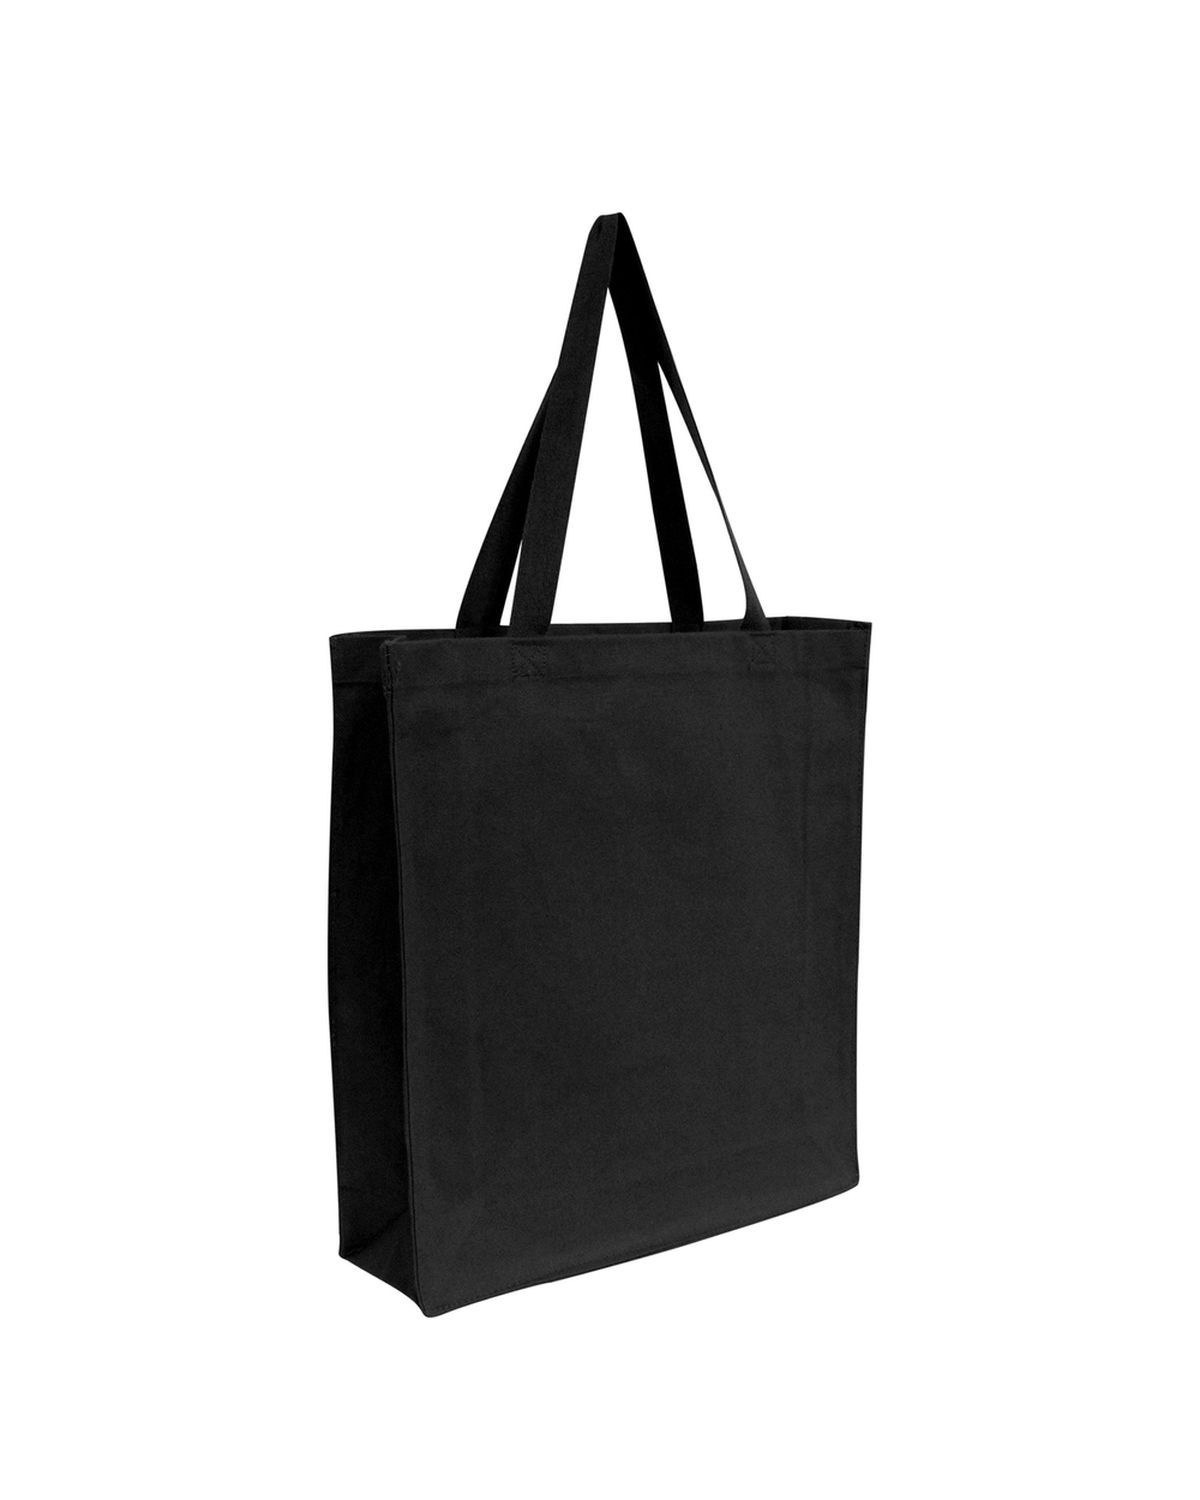 'OAD OAD100 Promotional Canvas Shopper Tote'